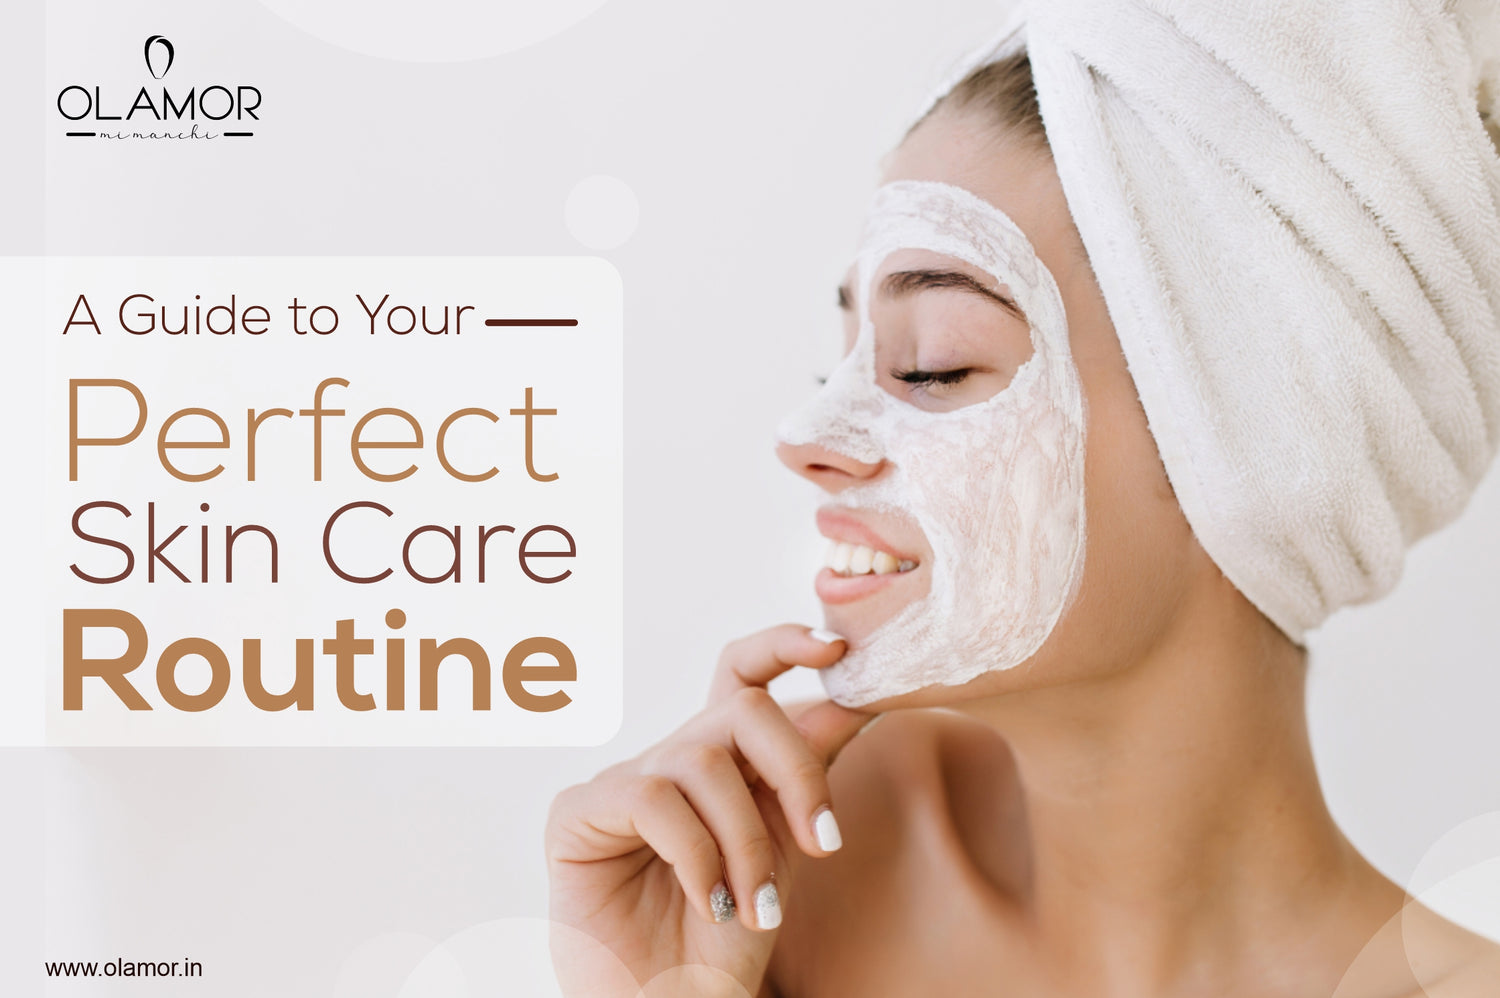 A Guide to Your Perfect Skincare Routine